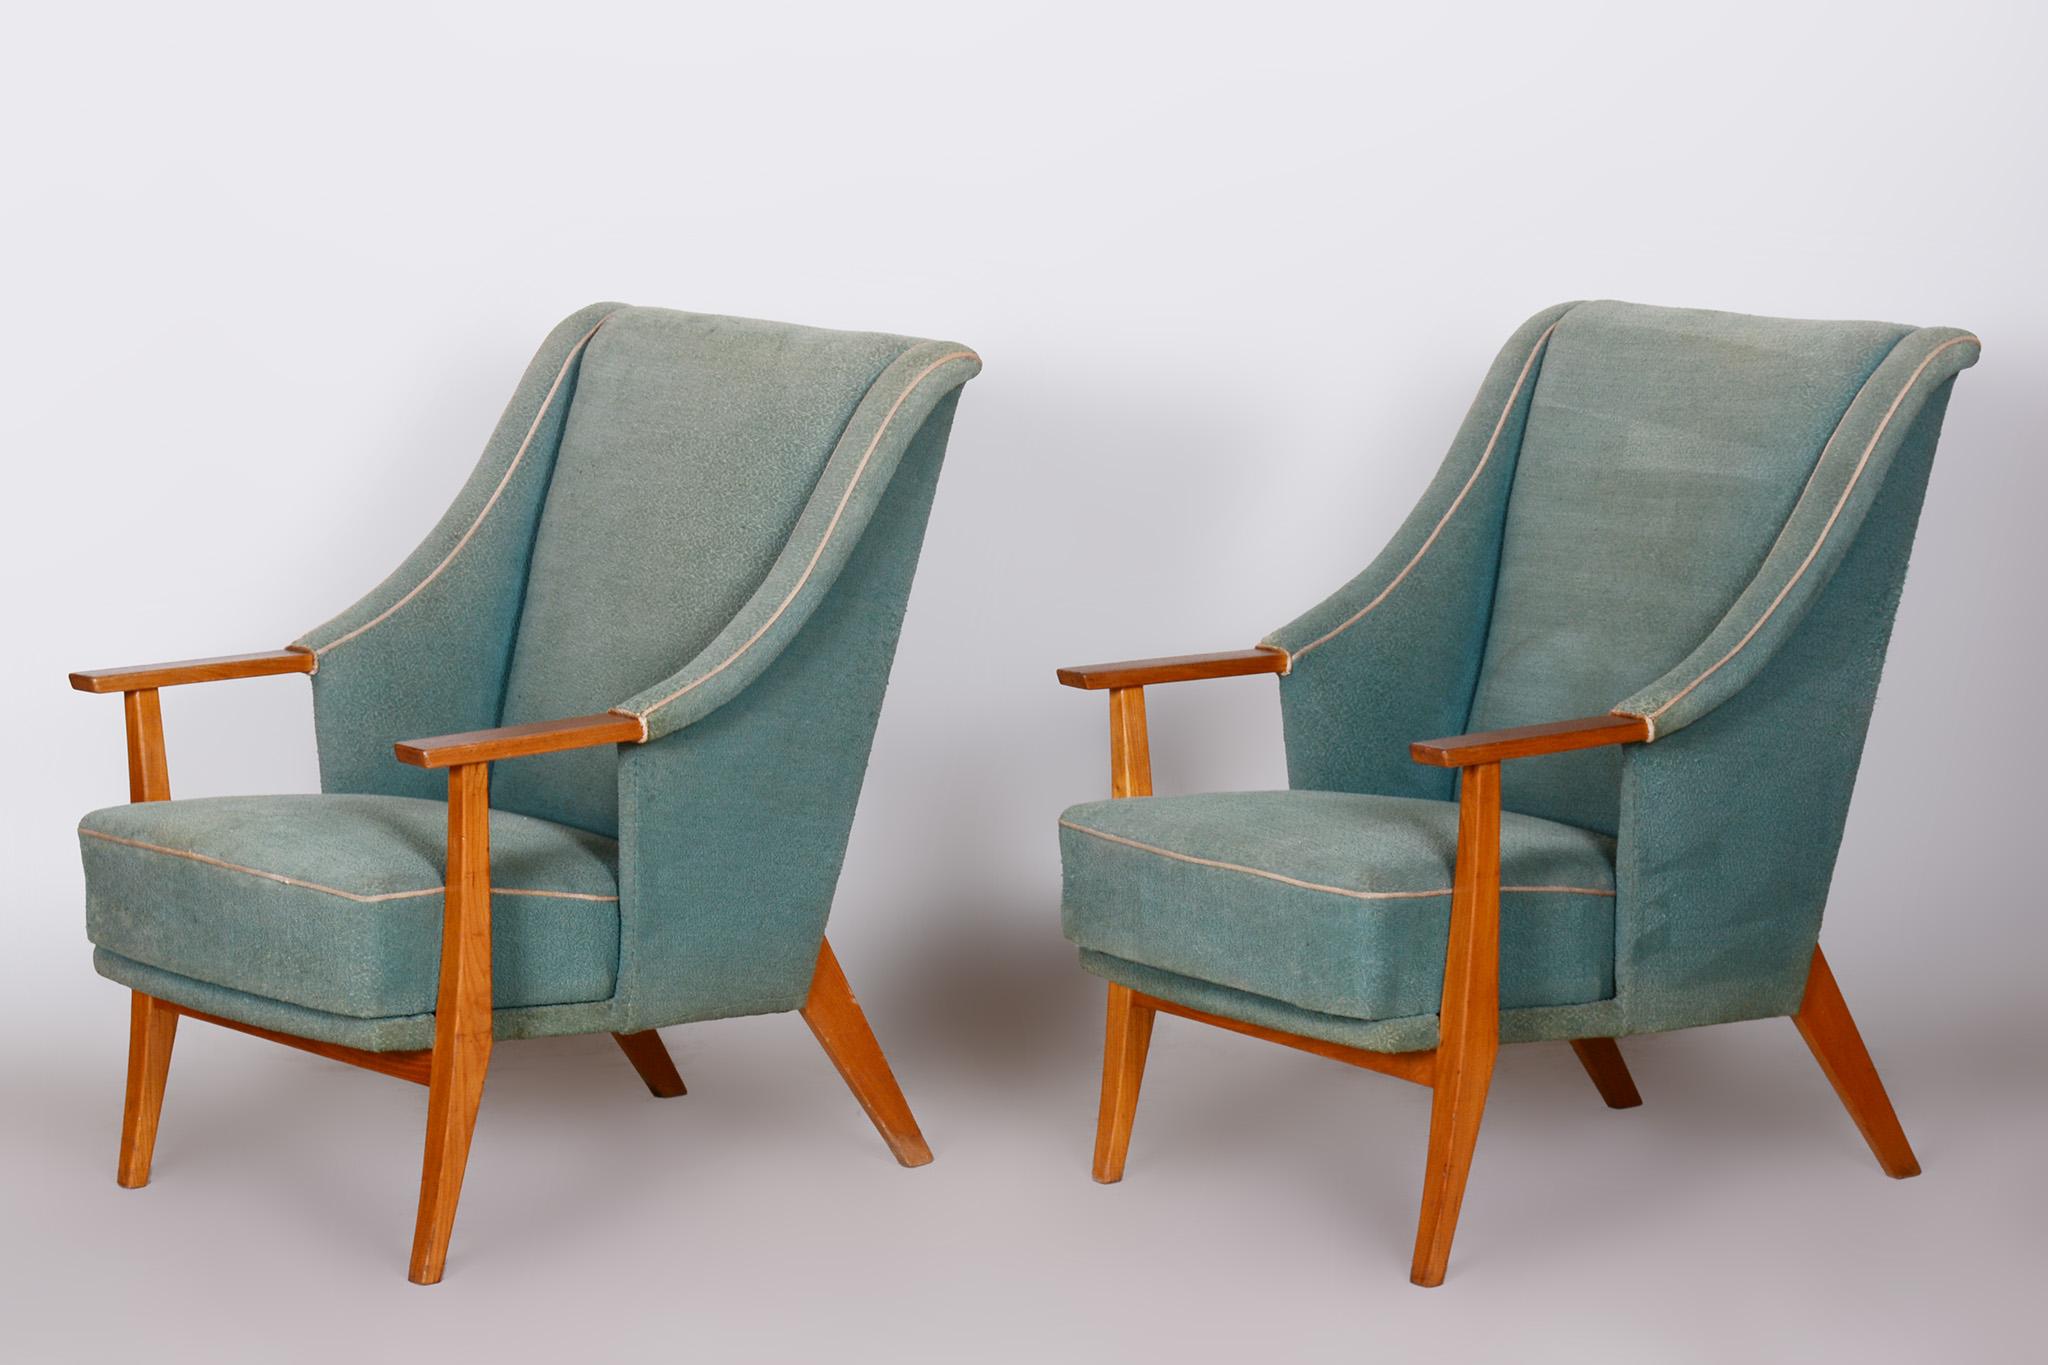 Pair of Unique Green Beech ArtDeco Armchairs Made in 1940s, Denmark For Sale 4